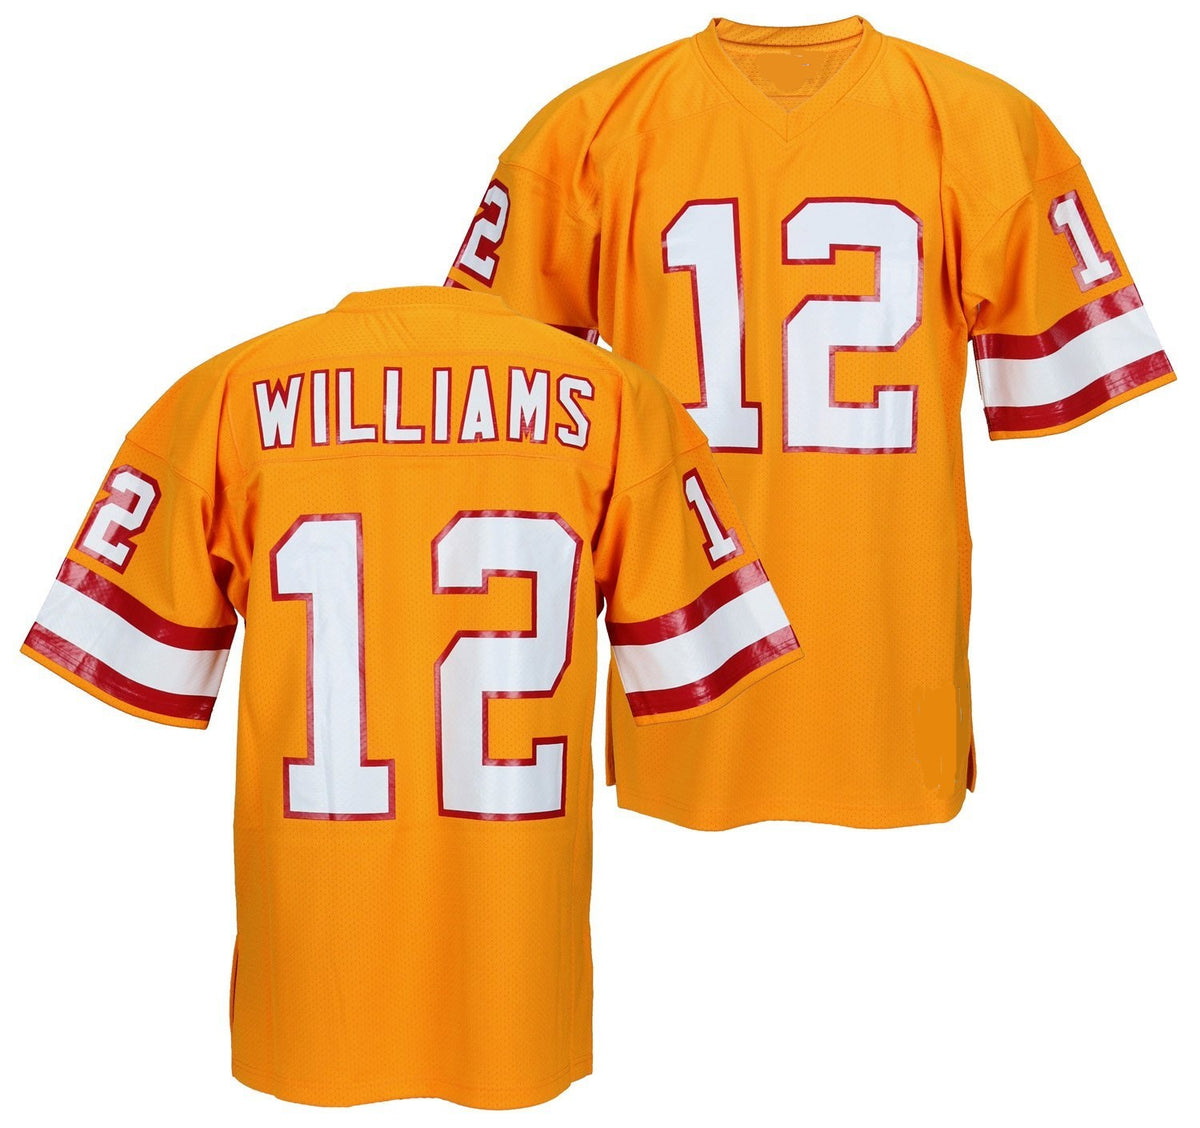 Doug Williams Tampa Bay Buccaneers Throwback Jersey – Best Sports